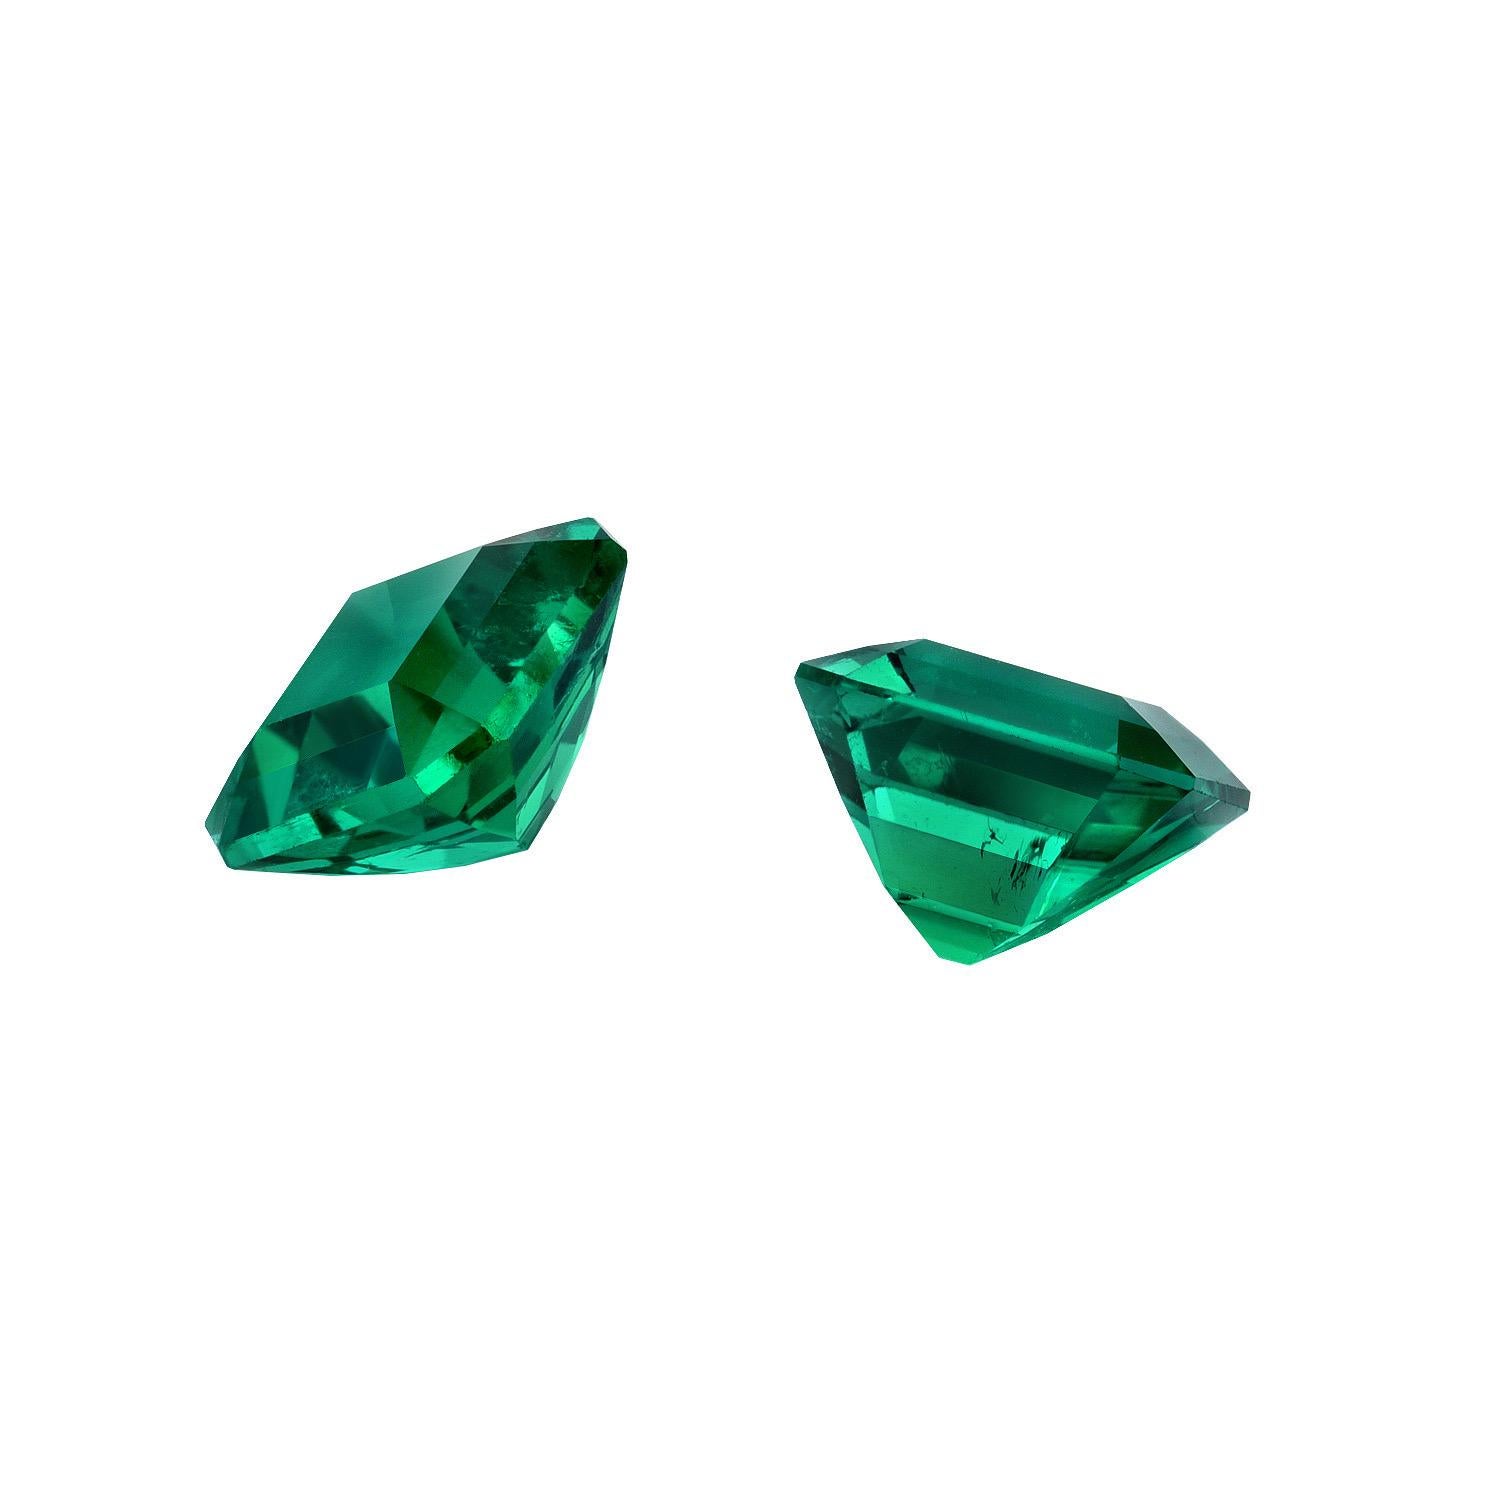 Exceptional pair of vivid green Muzo Colombia Emeralds weighing a total of 2.95 carats, offered loose and unmounted to a very exclusive gemstone collector. This pair showcases rare clarity, color and cut.
The GRS gem certificates and appendix